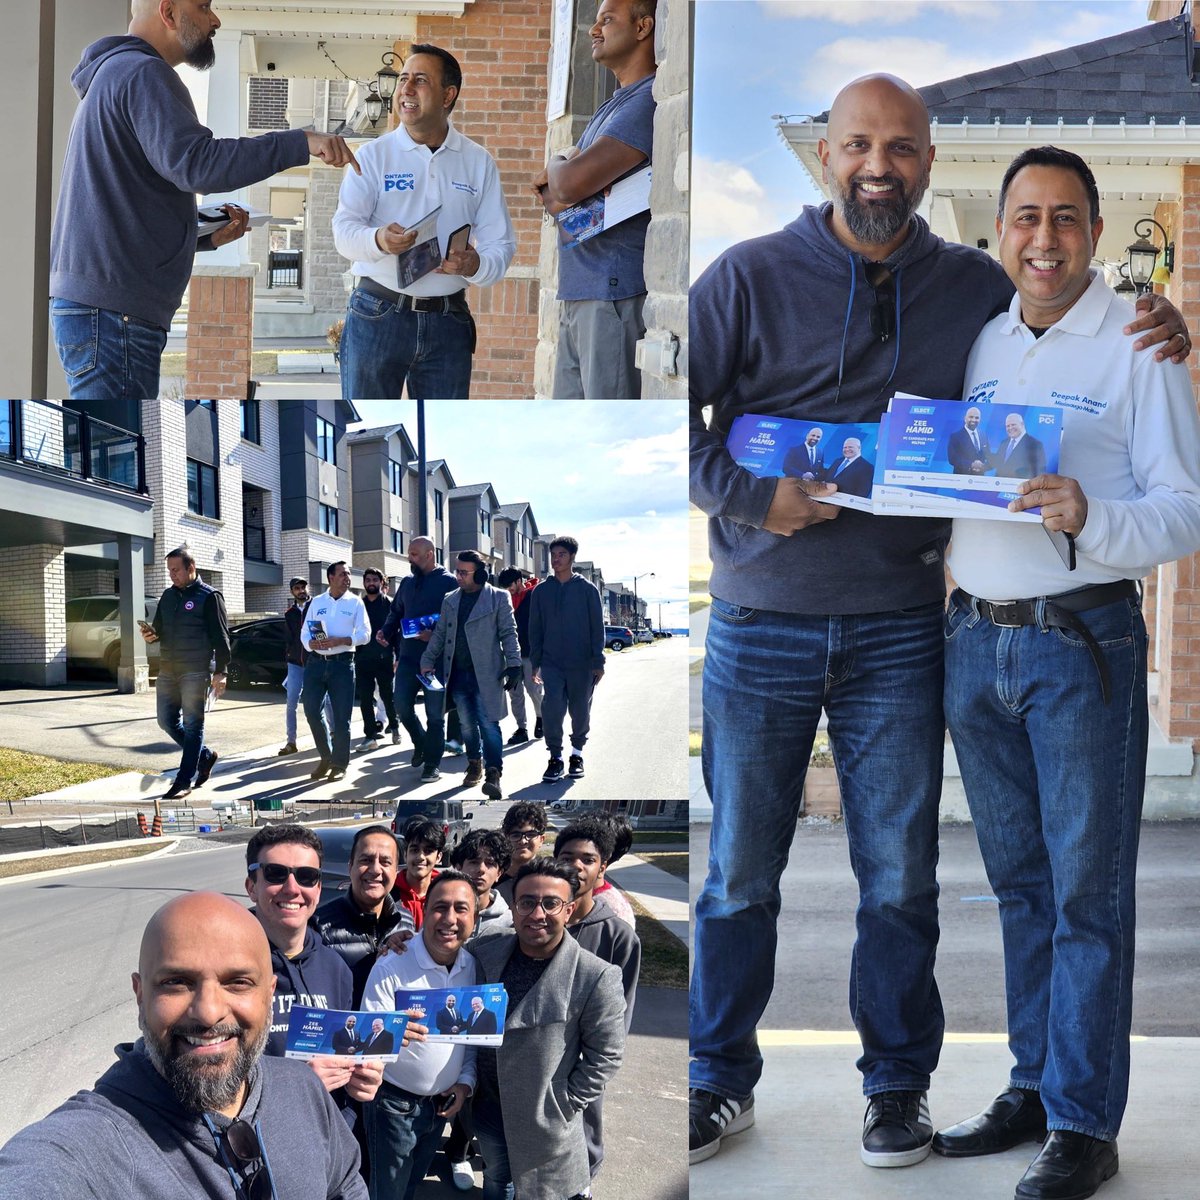 Happy to have my friend @DeepakAnandMPP out knocking on doors with a great group of young people. Their energy for #Milton is infectious! #VoteZee